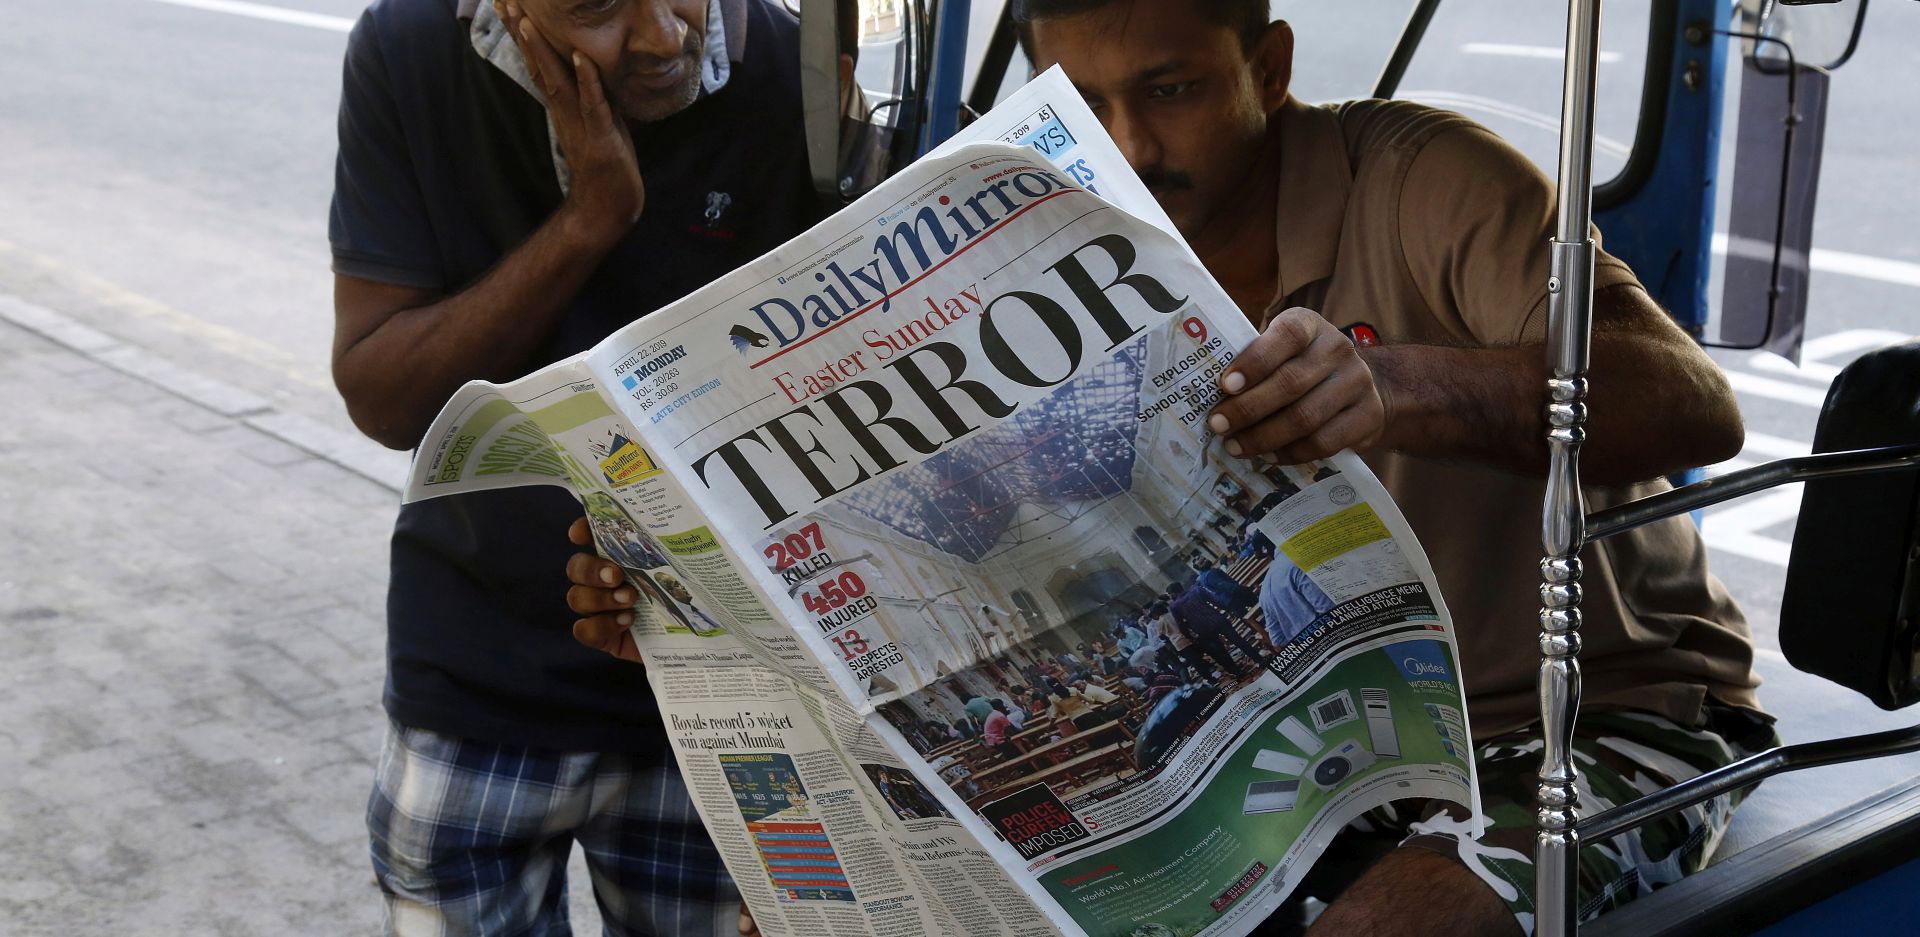 epa07520824 People read a newspaper the day after multiple blasts killed hundreds in Colombo, Sri Lanka, 22 April 2019. According to news reports, at least 290 people have been killed and over 500 were injured on 21 April 2019 in a series of blasts during Easter Sunday service at churches and hotels across Colombo.  EPA/M.A. PUSHPA KUMARA